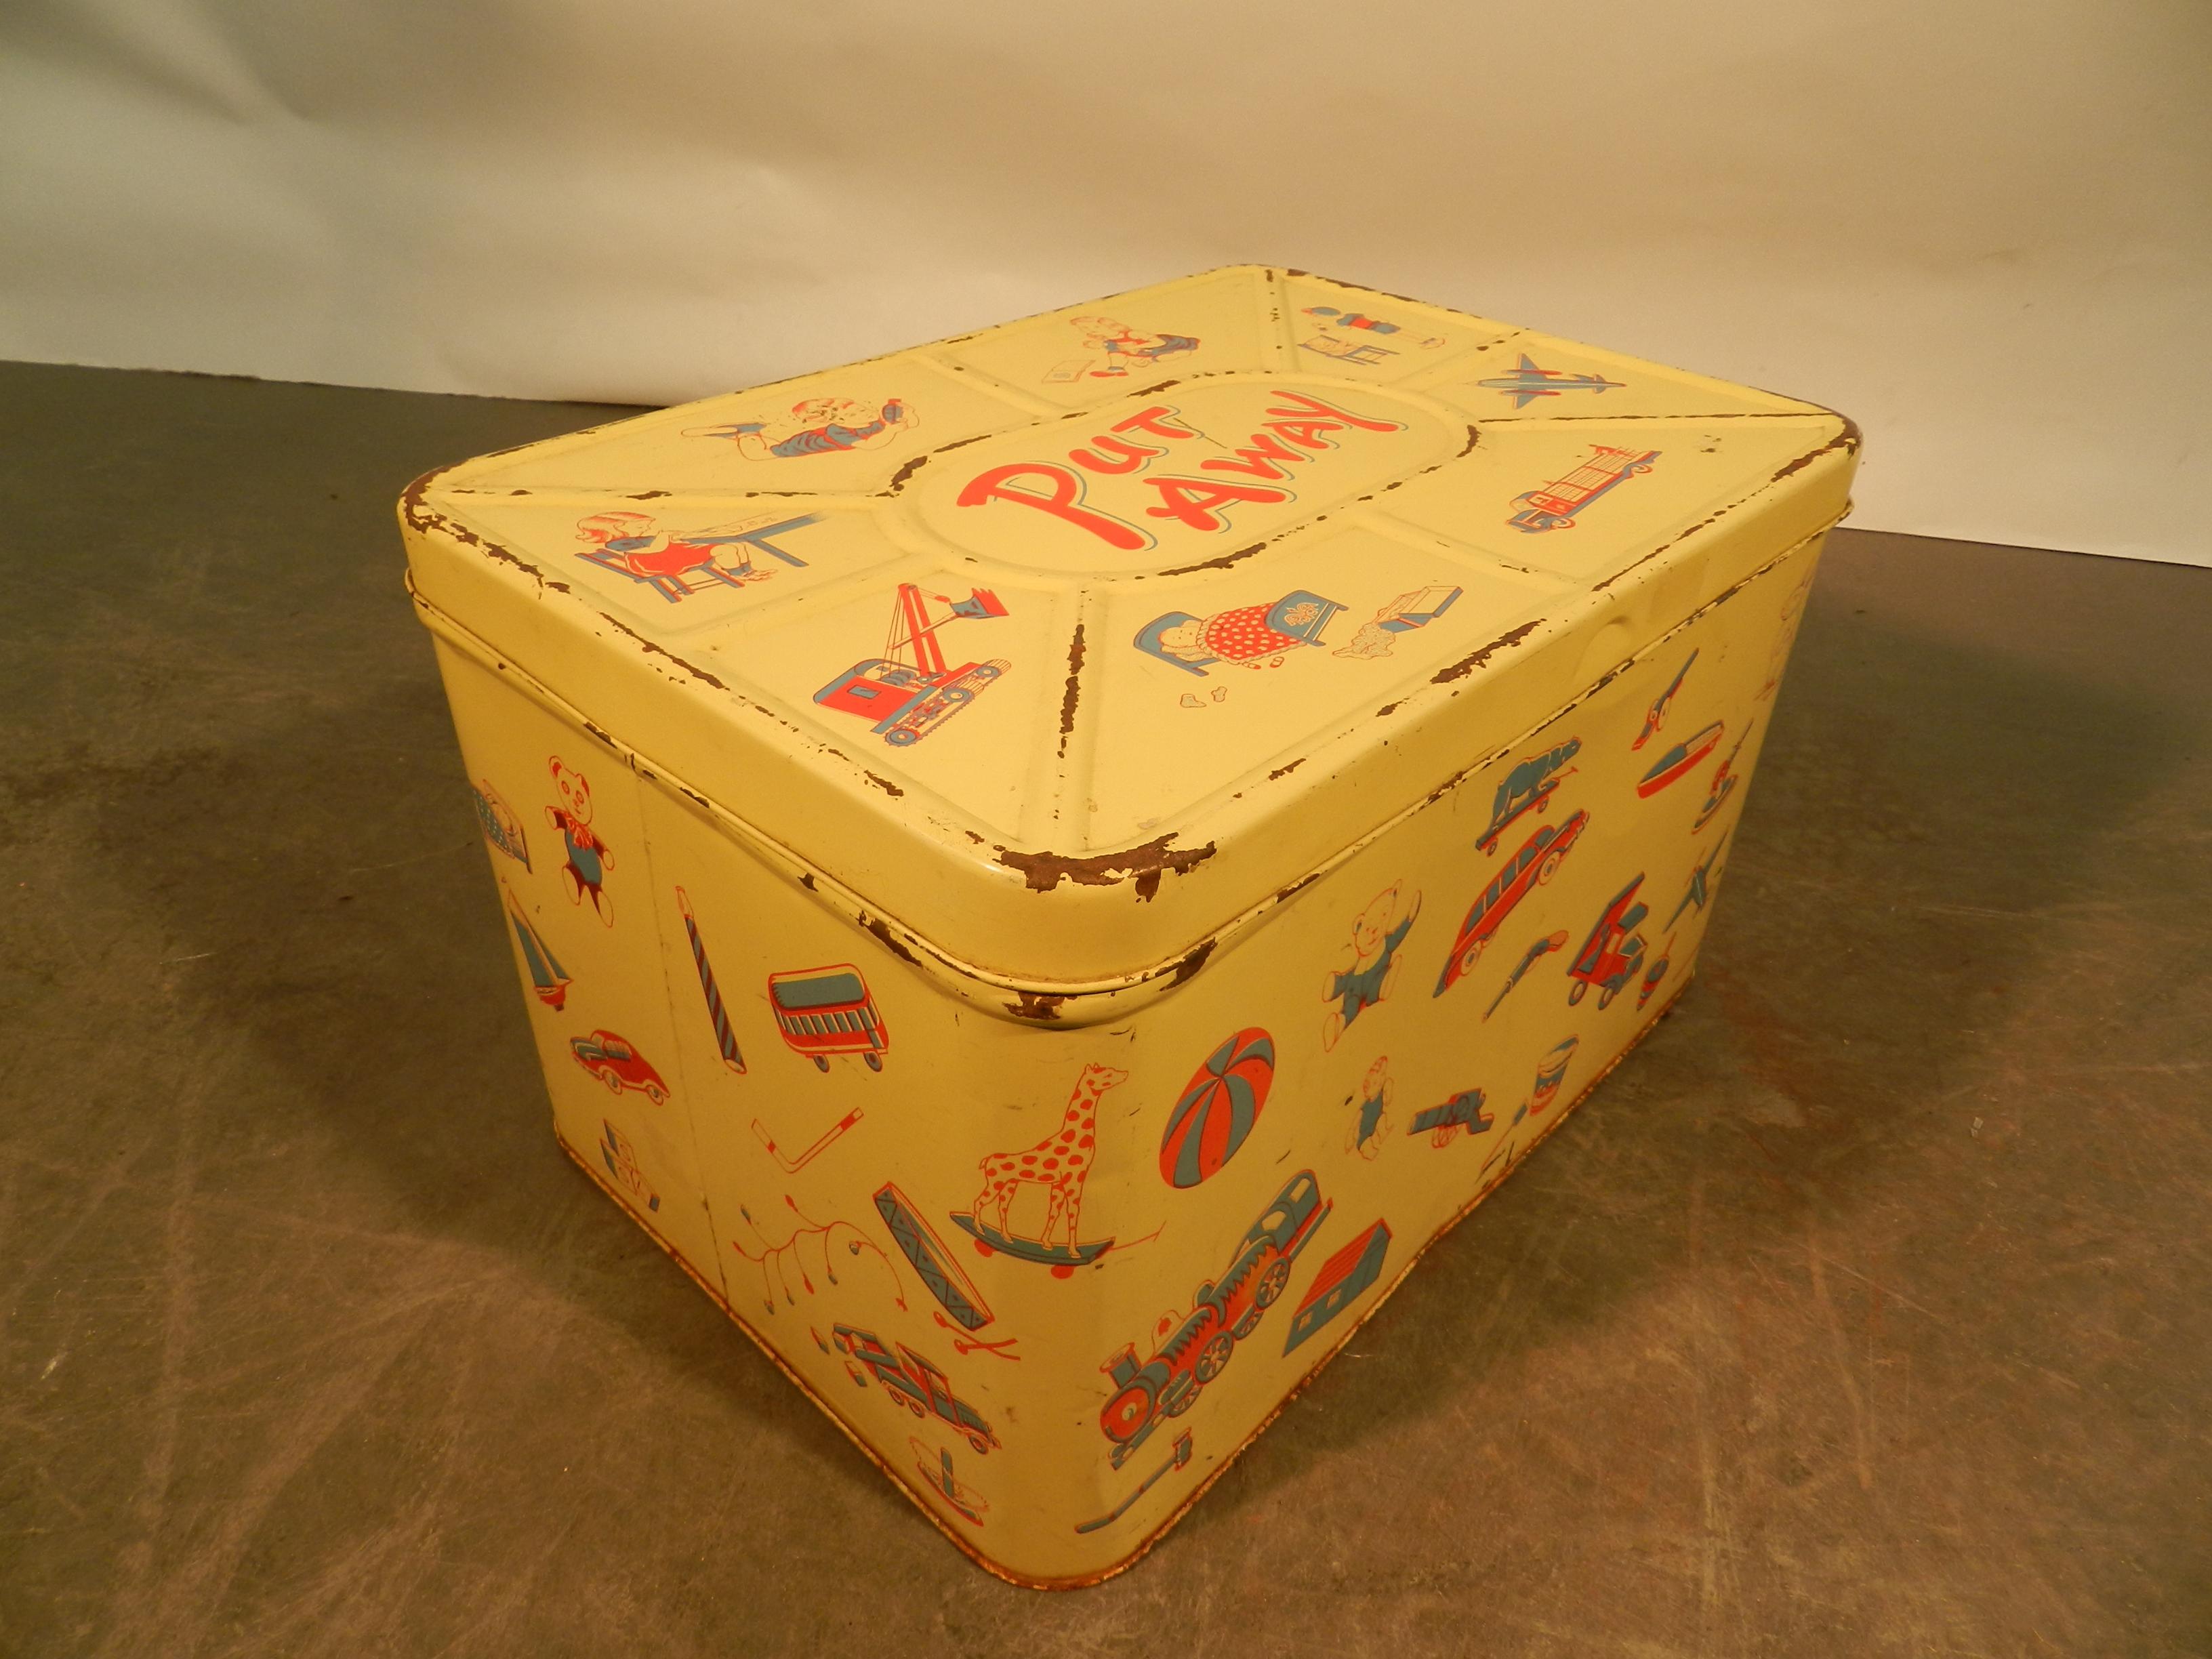 Canadian Putaway, Vintage Toy Chest in Lacquered Metal, circa 1960 For Sale